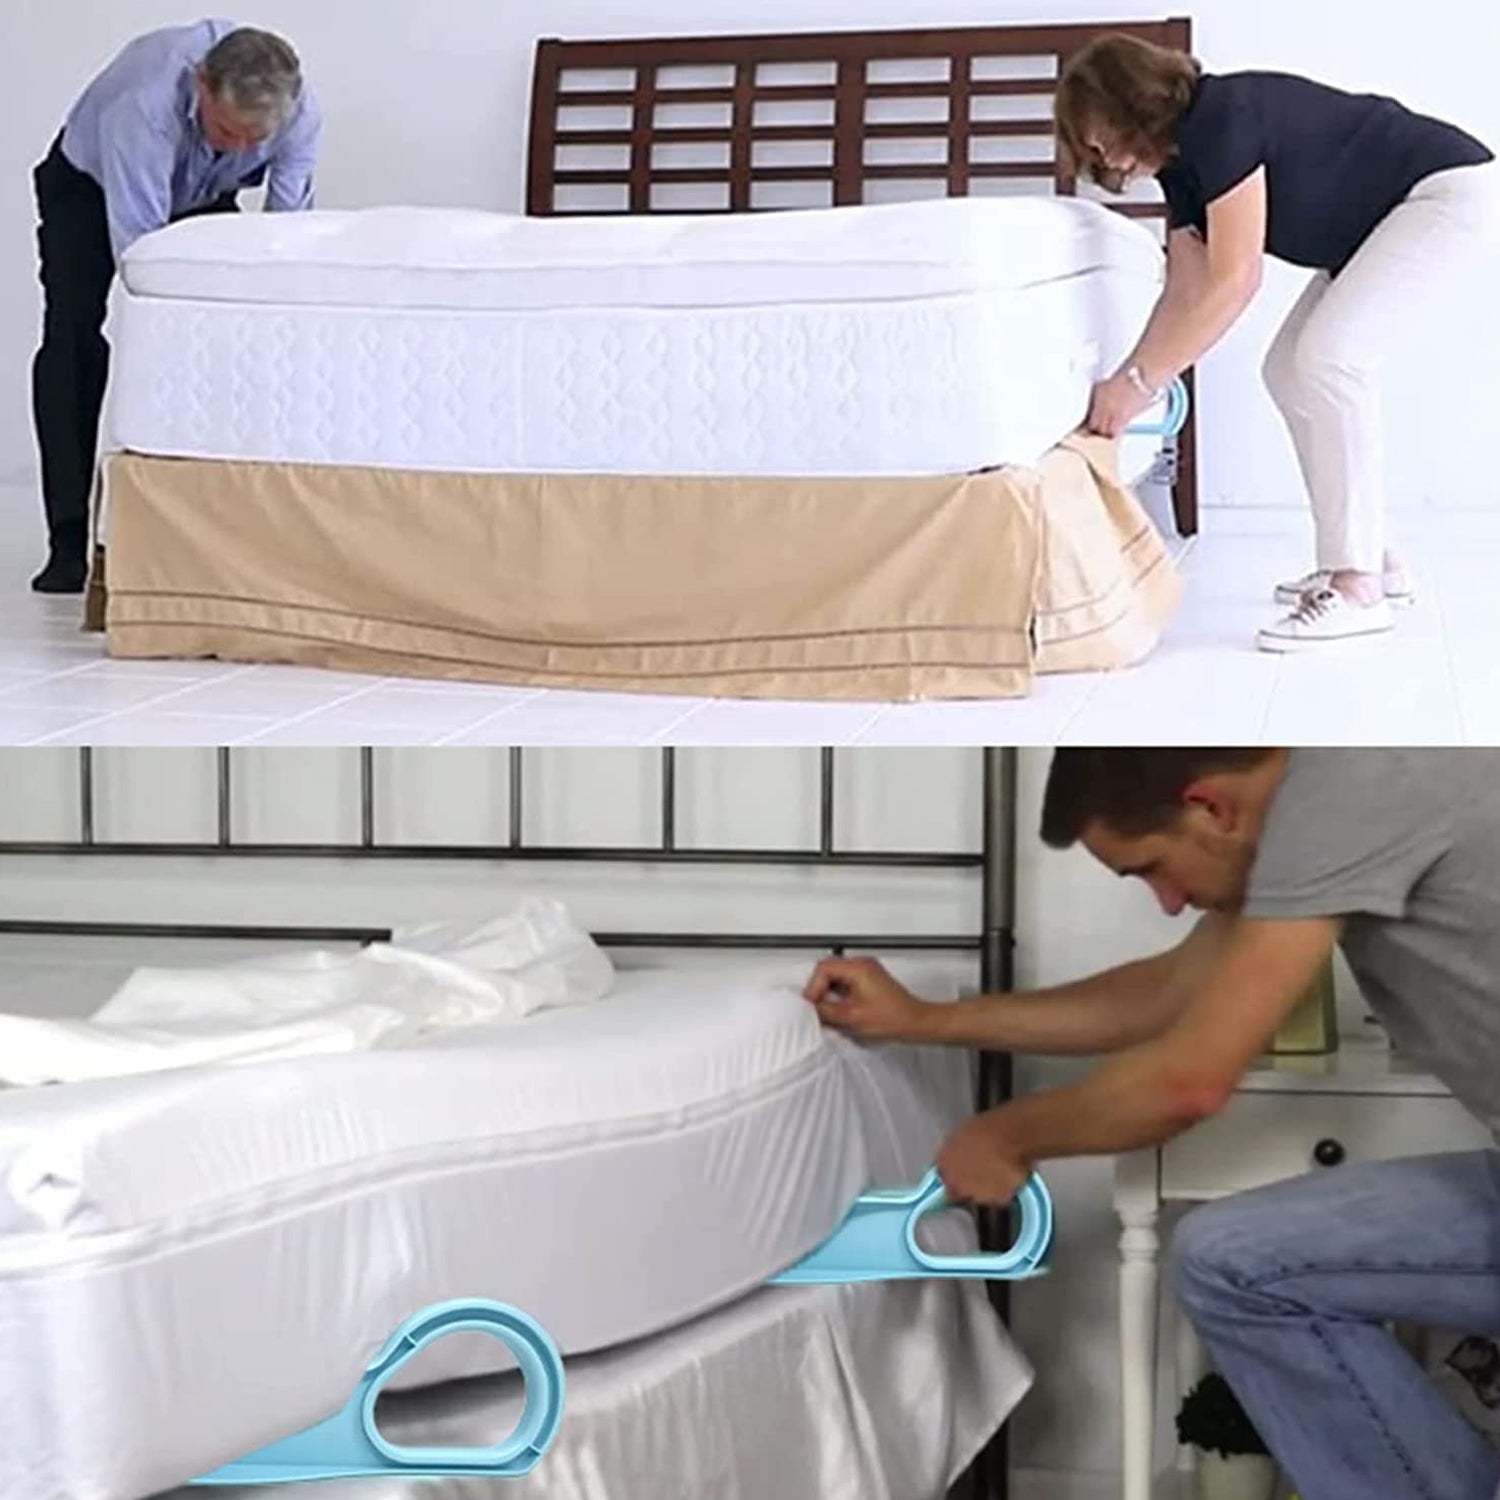 9013 Mattress Lifter Bed Making & Change Bed Sheets Instantly helping Tool ( 1 pc ) DeoDap